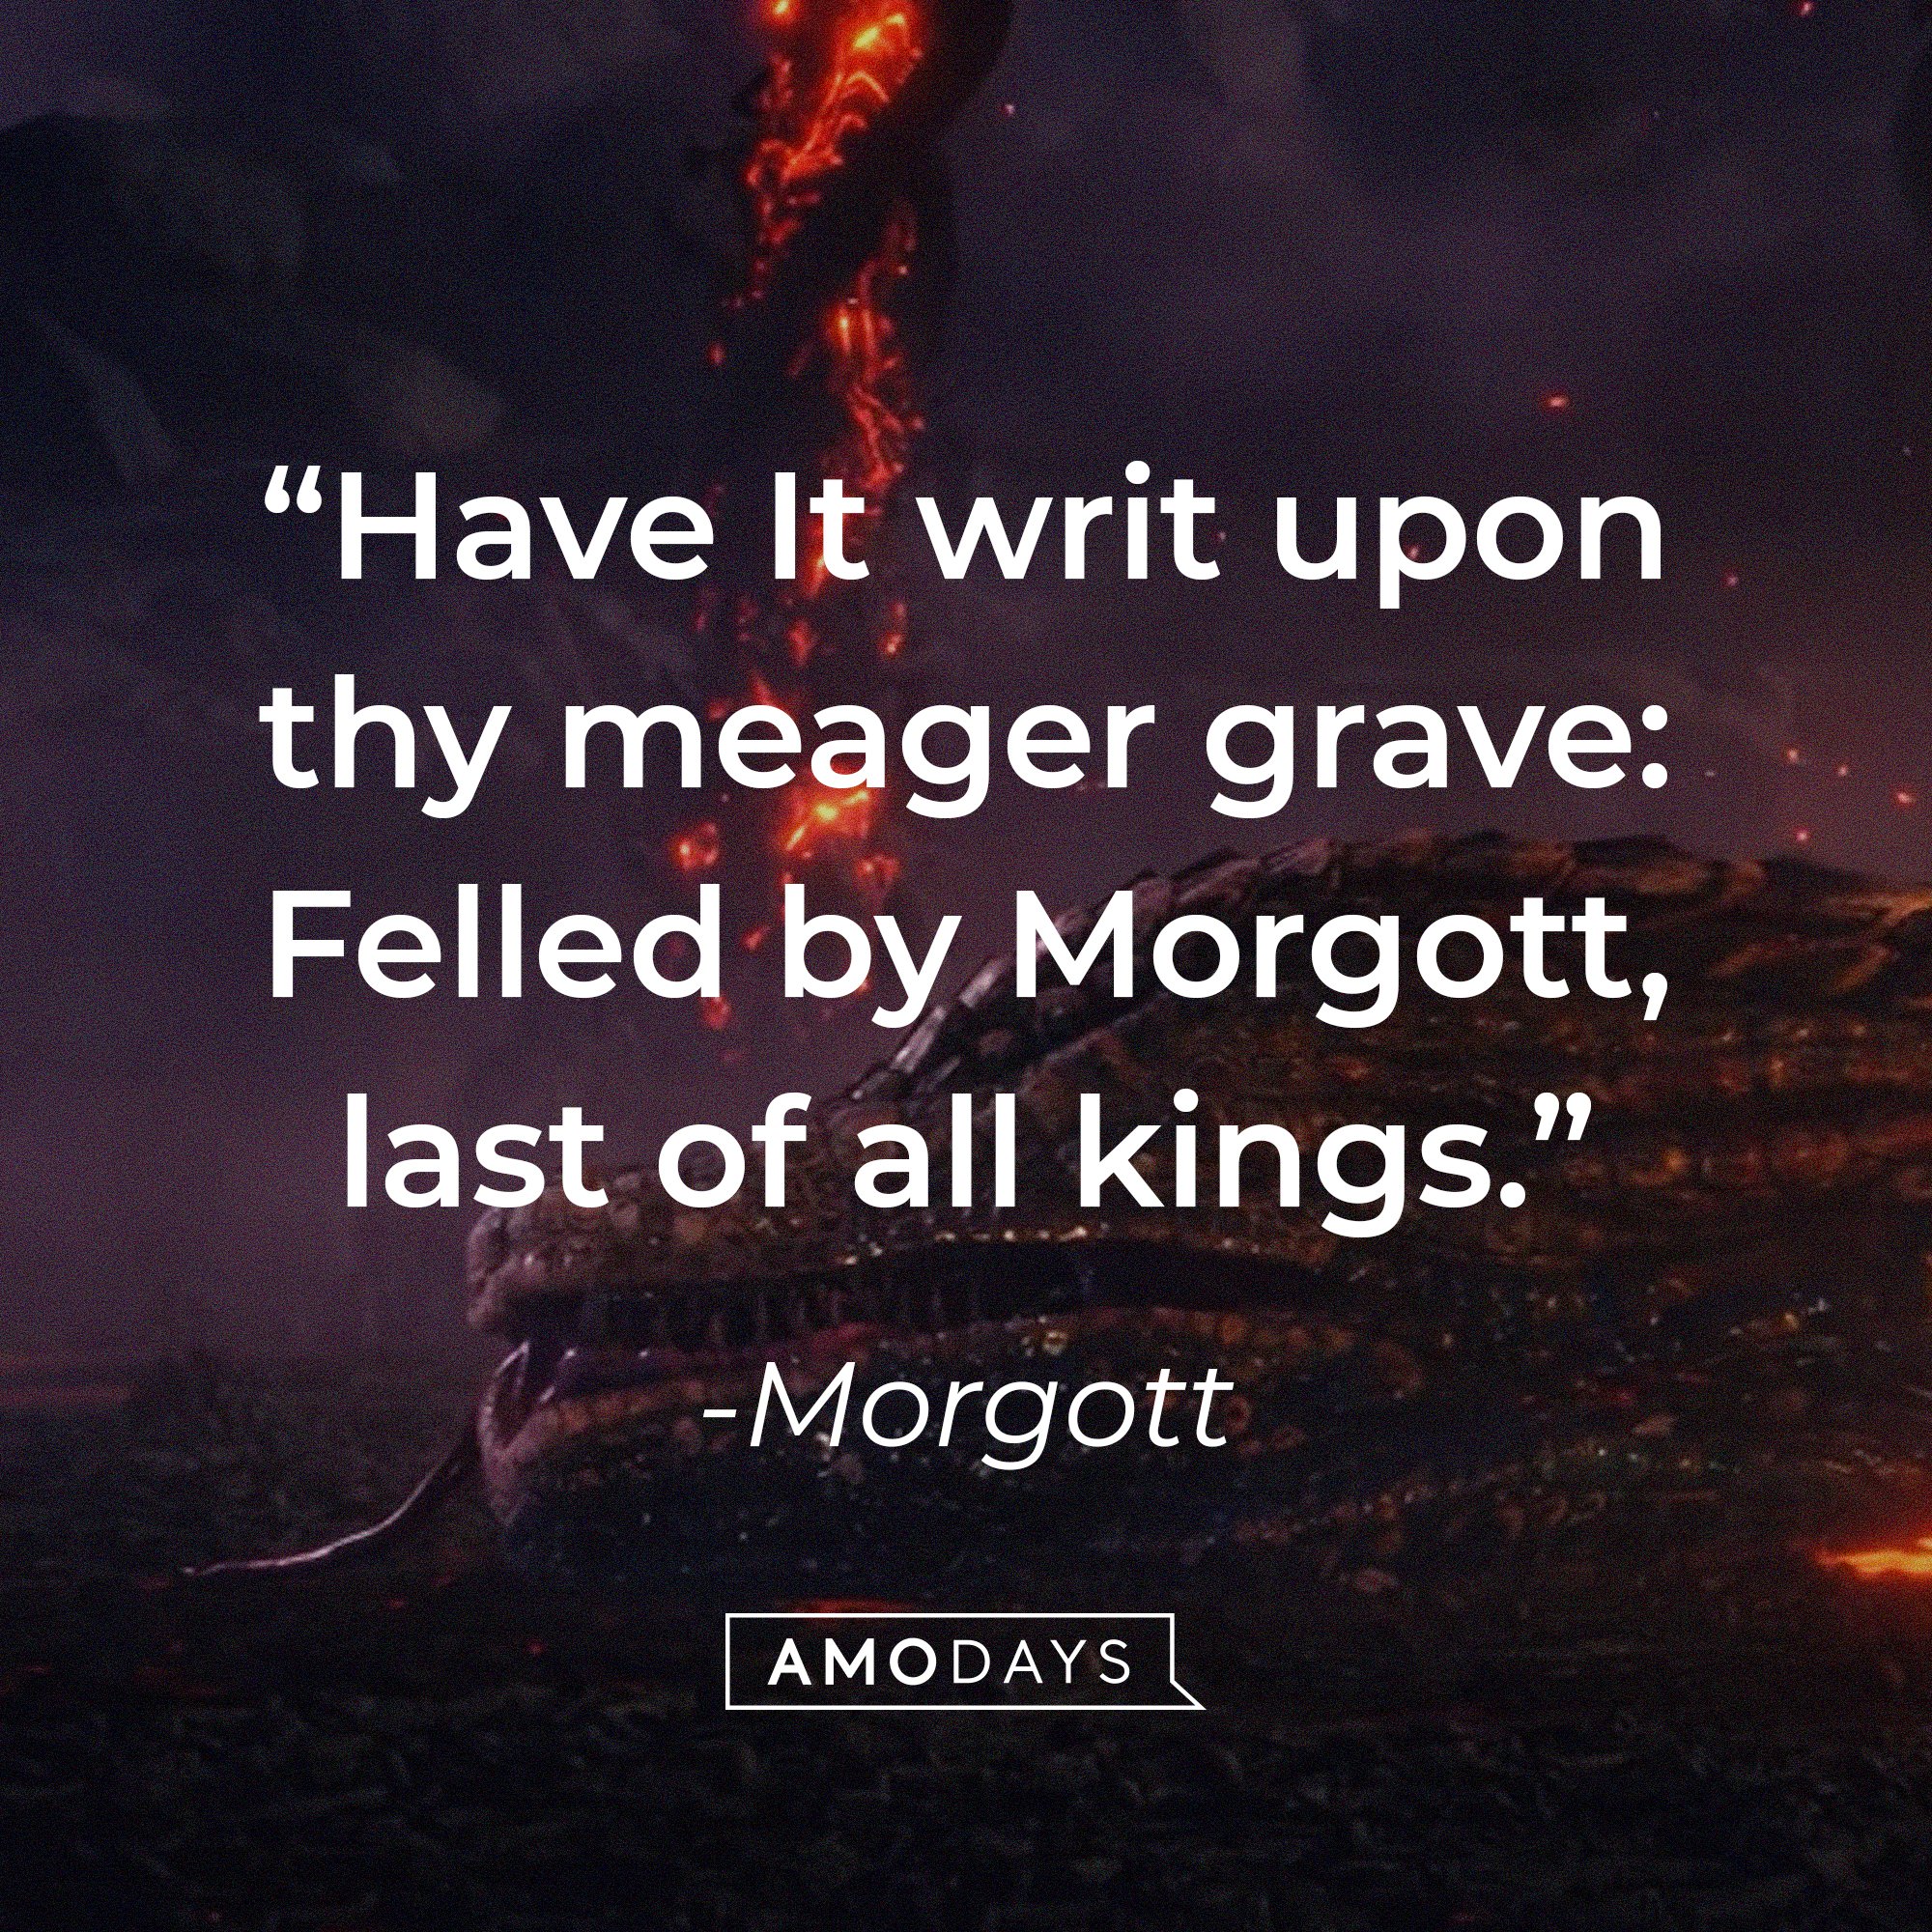 Morgott‘s quote: "Have It writ upon thy meager grave: Felled by Morgott, last of all kings." | Image: AmoDays